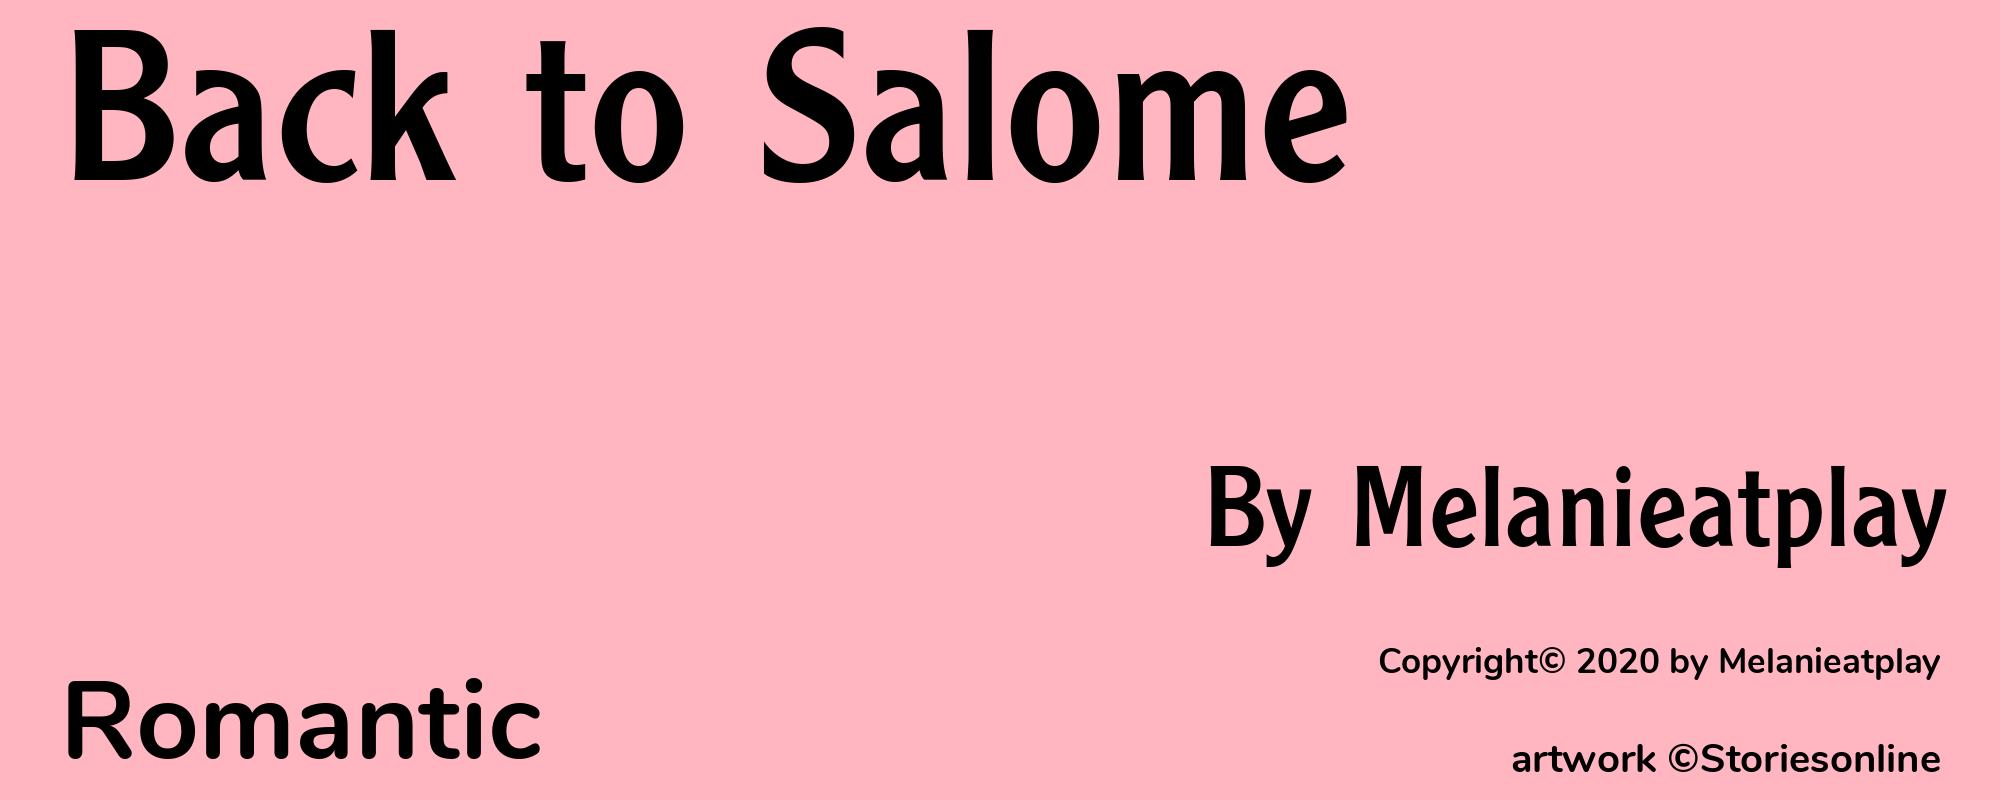 Back to Salome - Cover